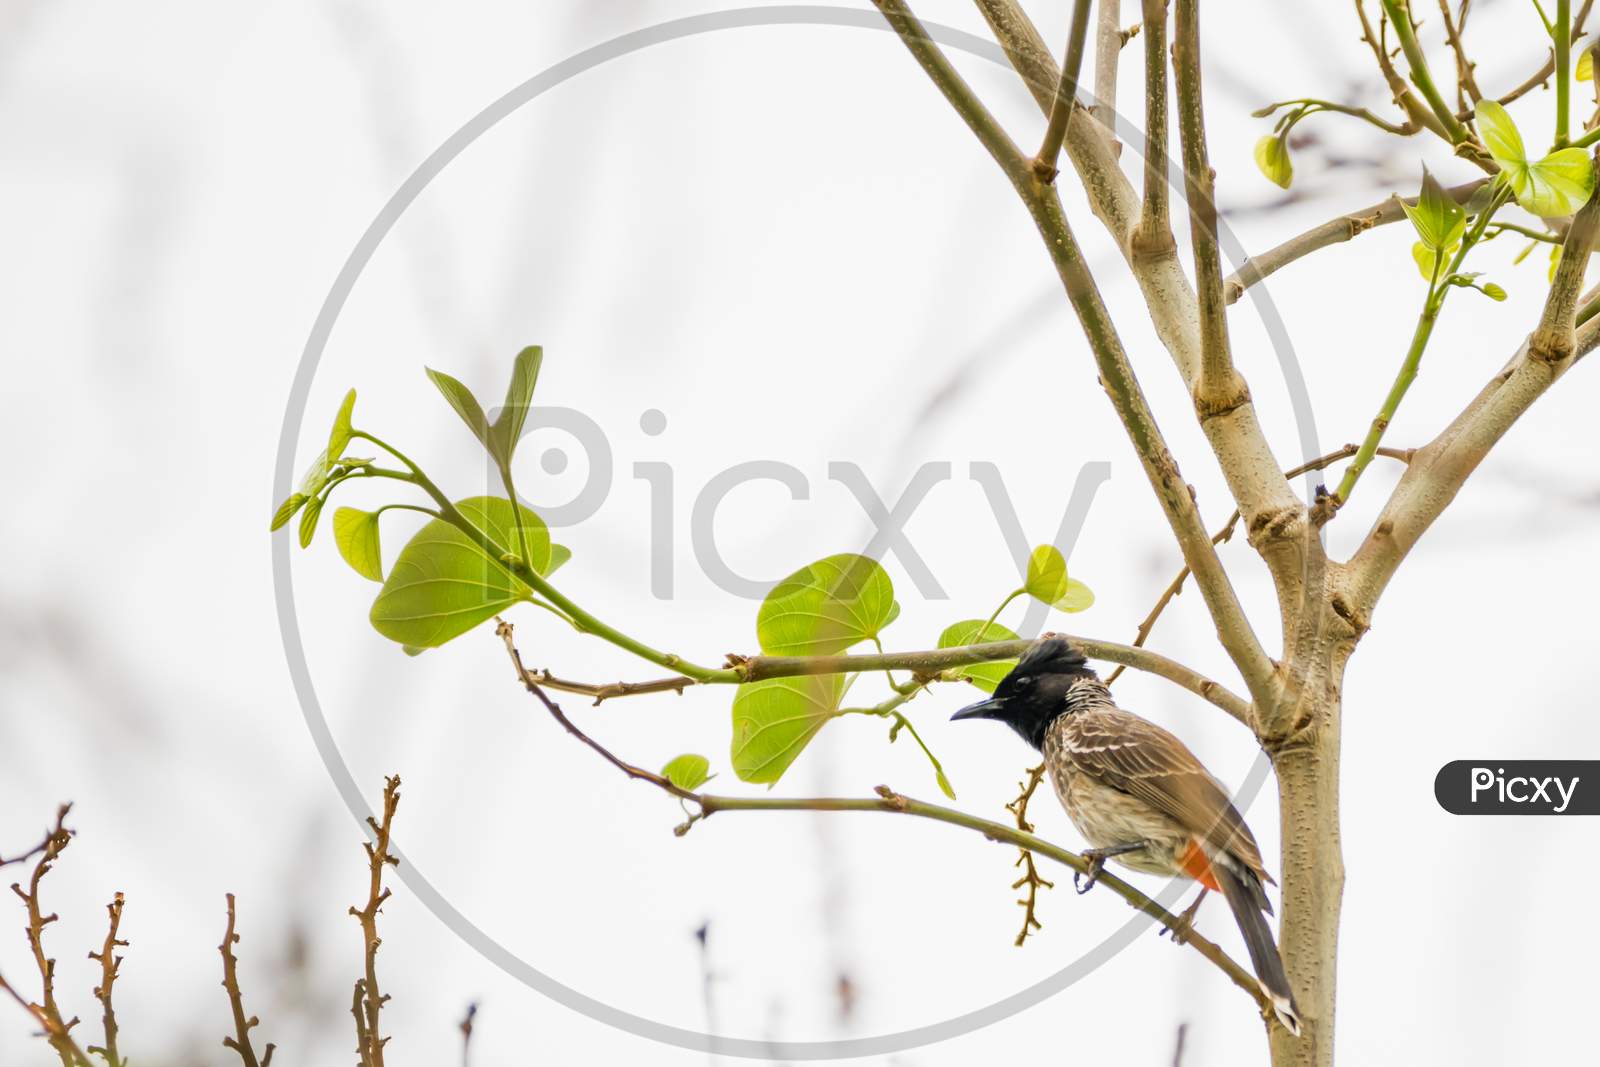 Red-Vented Bulbul (Pycnonotus Cafer) Perching On A Twig With Leaves